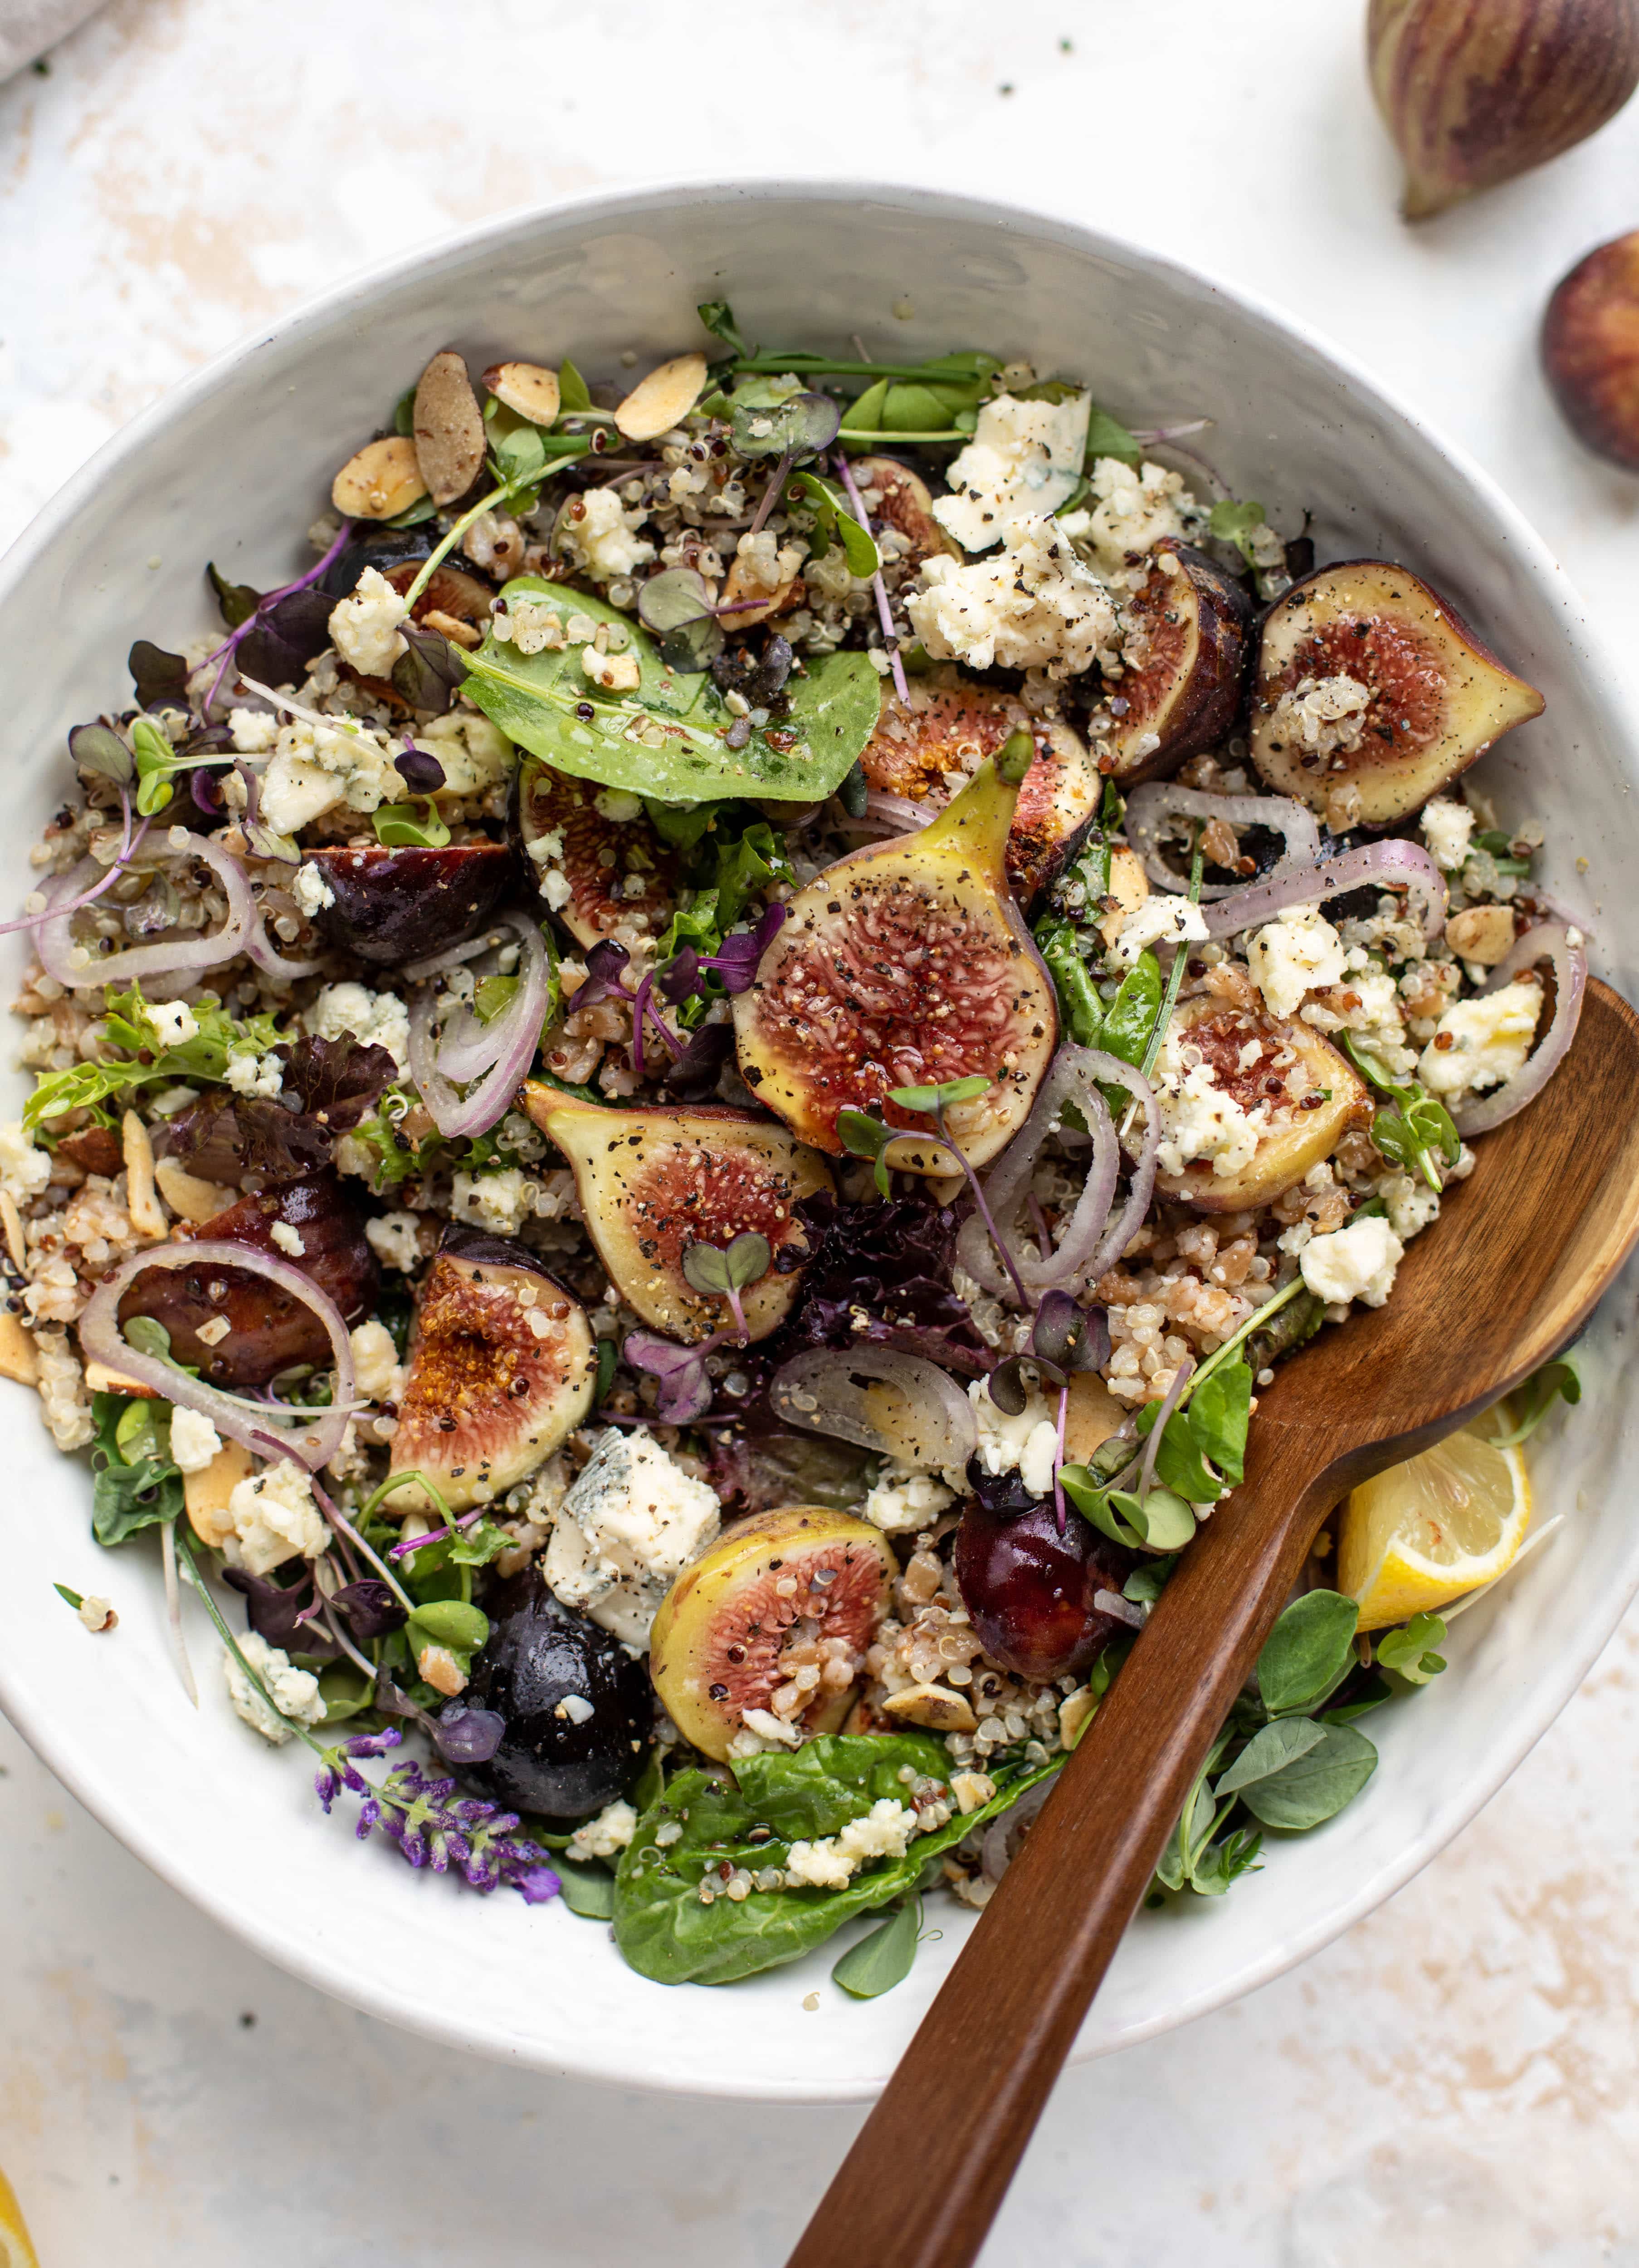 These grain bowls are the perfect September salad! Juicy figs, greens, quinoa, farro, almonds and a lemon lavender vinaigrette make this bowl irresistible. 